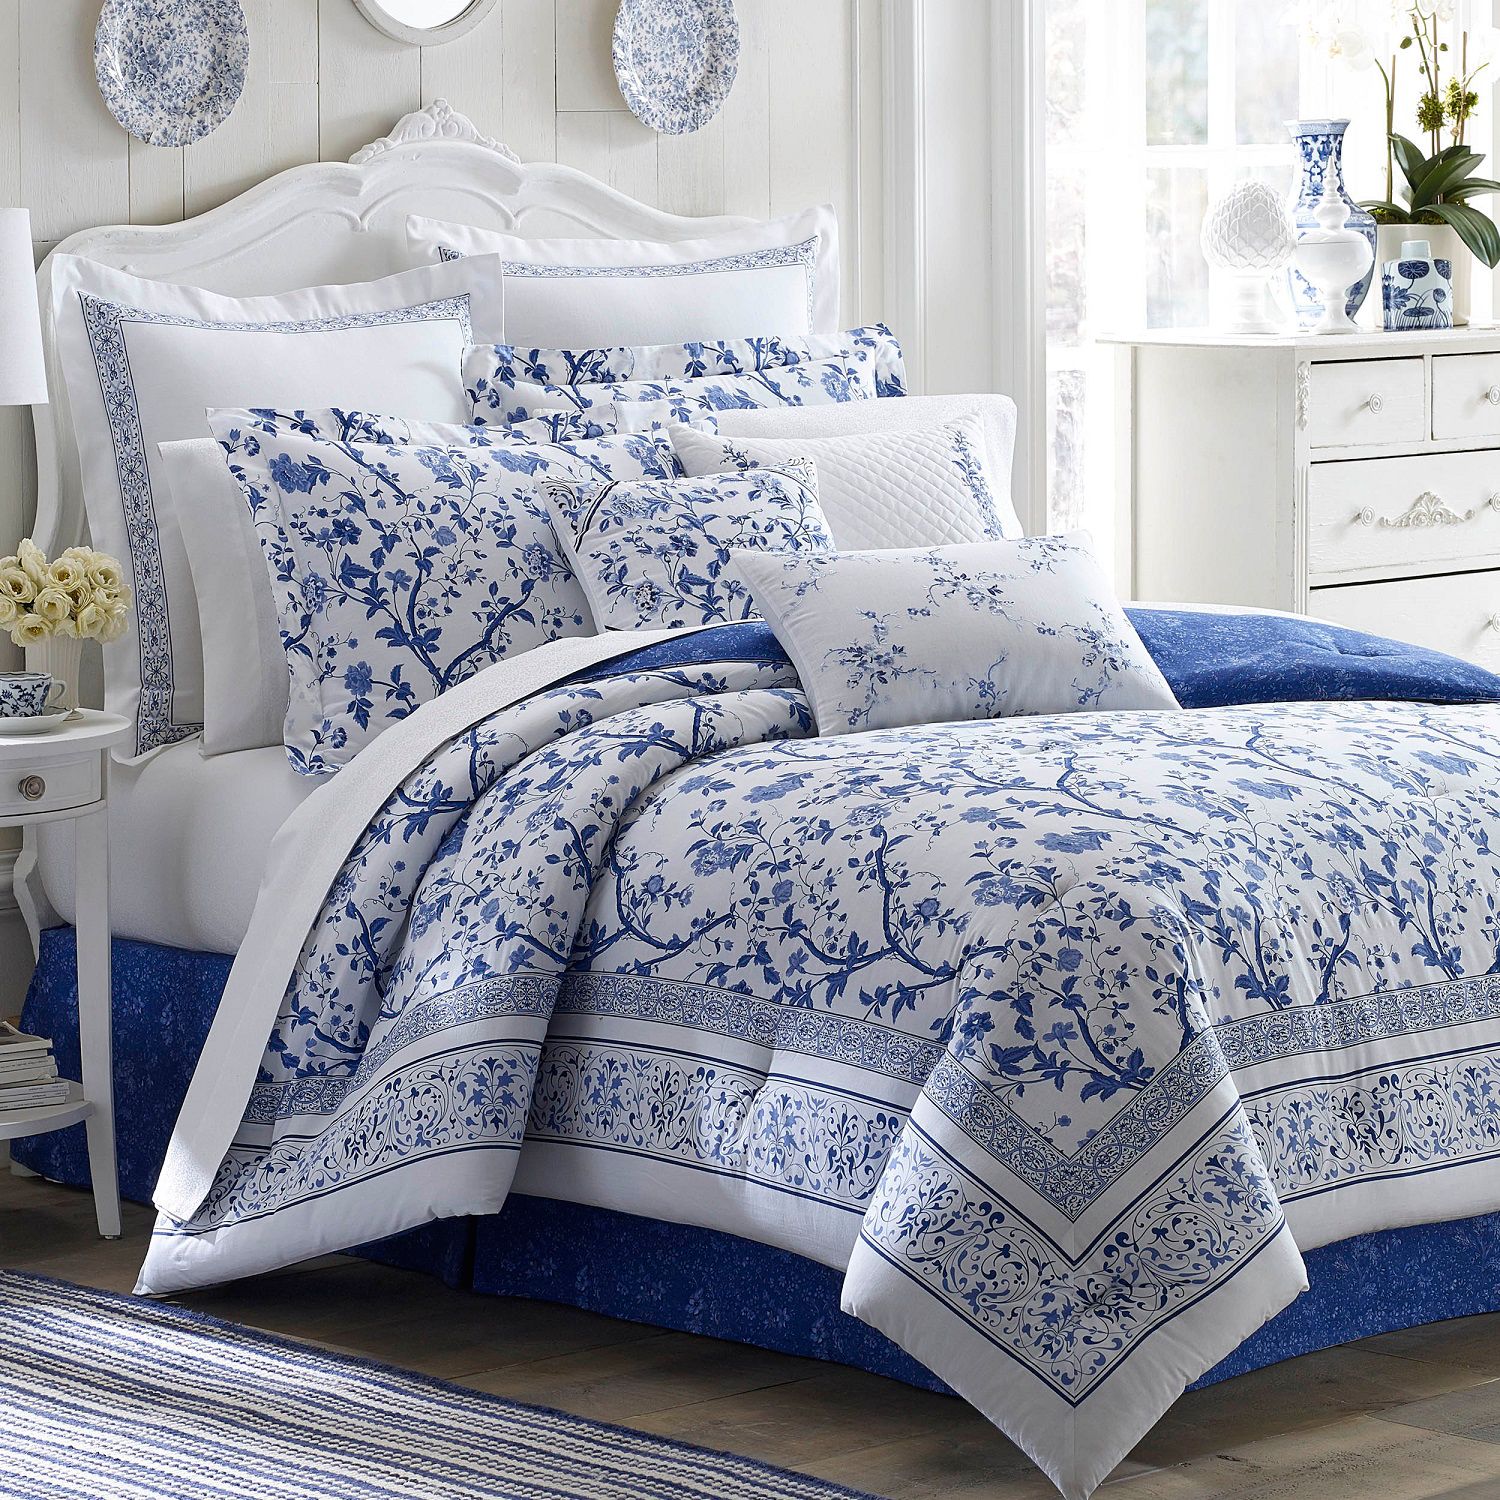 Image for Laura Ashley Lifestyles Charlotte Bedding Collection at Kohl's.